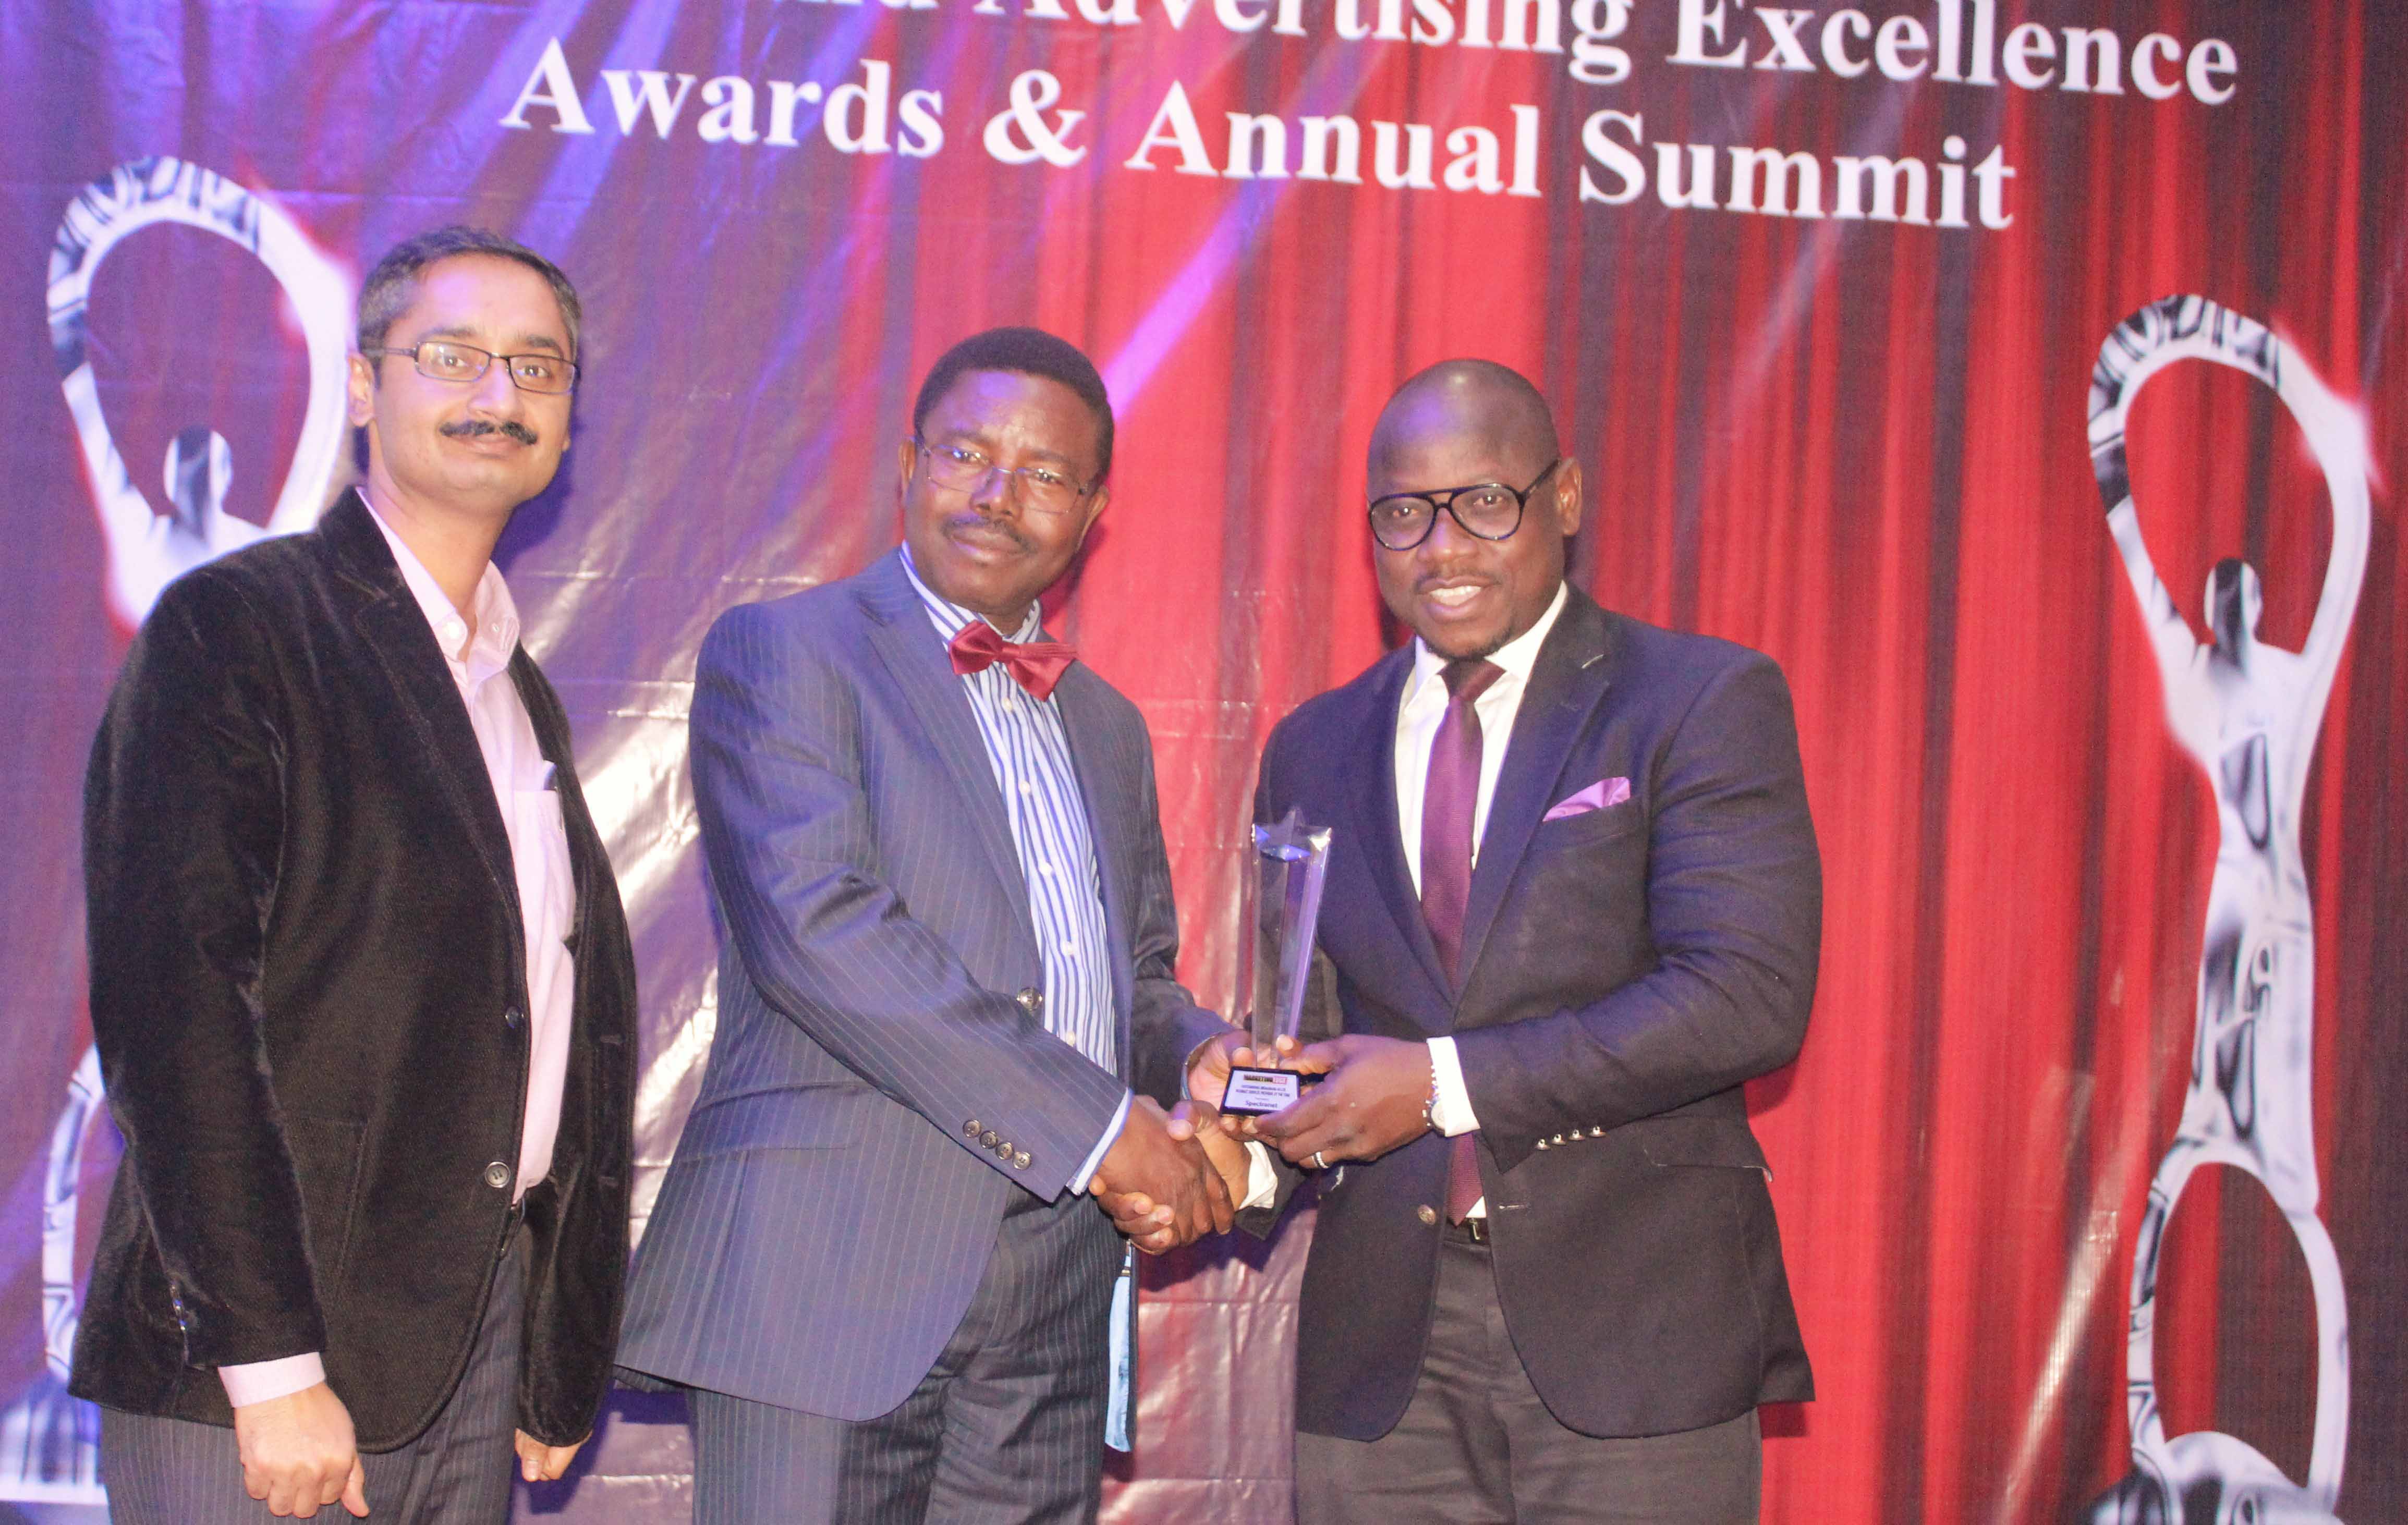 L-R - Head of Sales, Spectranet 4g LTE, Pankaj Manan, CEO, ROCK CITY FM, Abeokuta, Dr Niran Malaolu presenting the award of Outstanding Broadband 4g LTE, Internet Provider of the year to the Marketing Manager Spectranet 4g LTE, Samon Akejelu during the just concluded Marketing Edge, National Marketing Stakeholders Summit and Brands and Advertising Excellence Award at the Civic Centre, Victoria Island, Lagos recently  